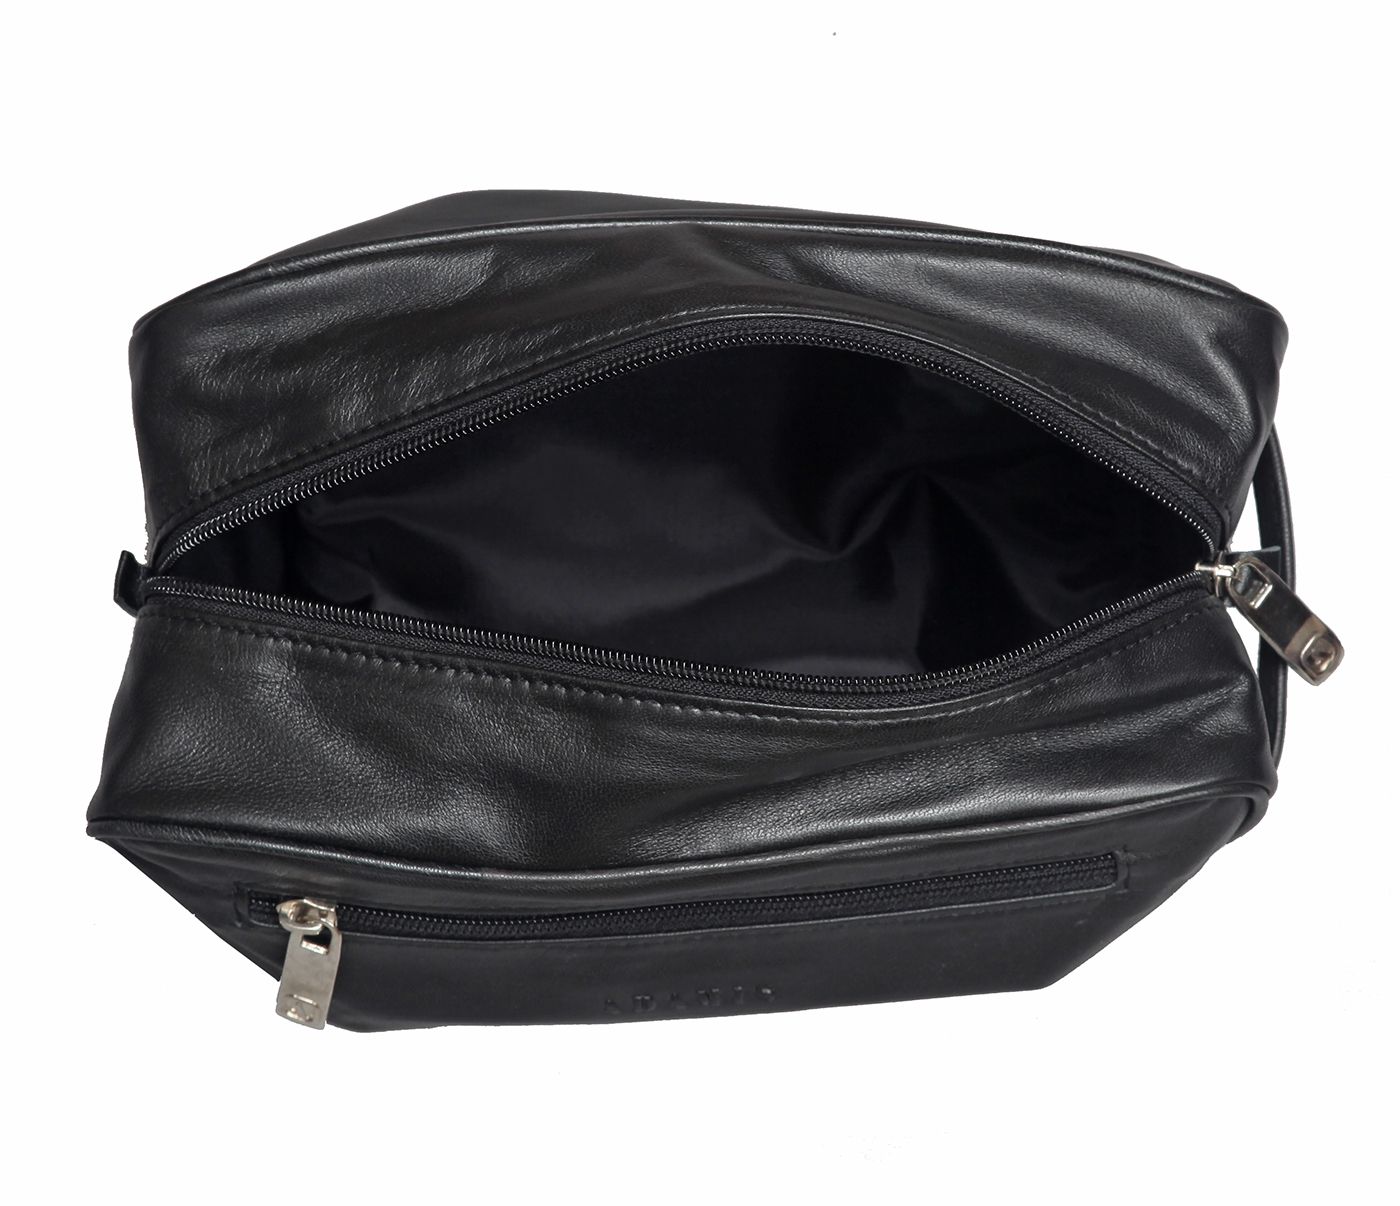 SC1--Unisex Wash & Toiletry travel Bag in Genuine Leather - Black